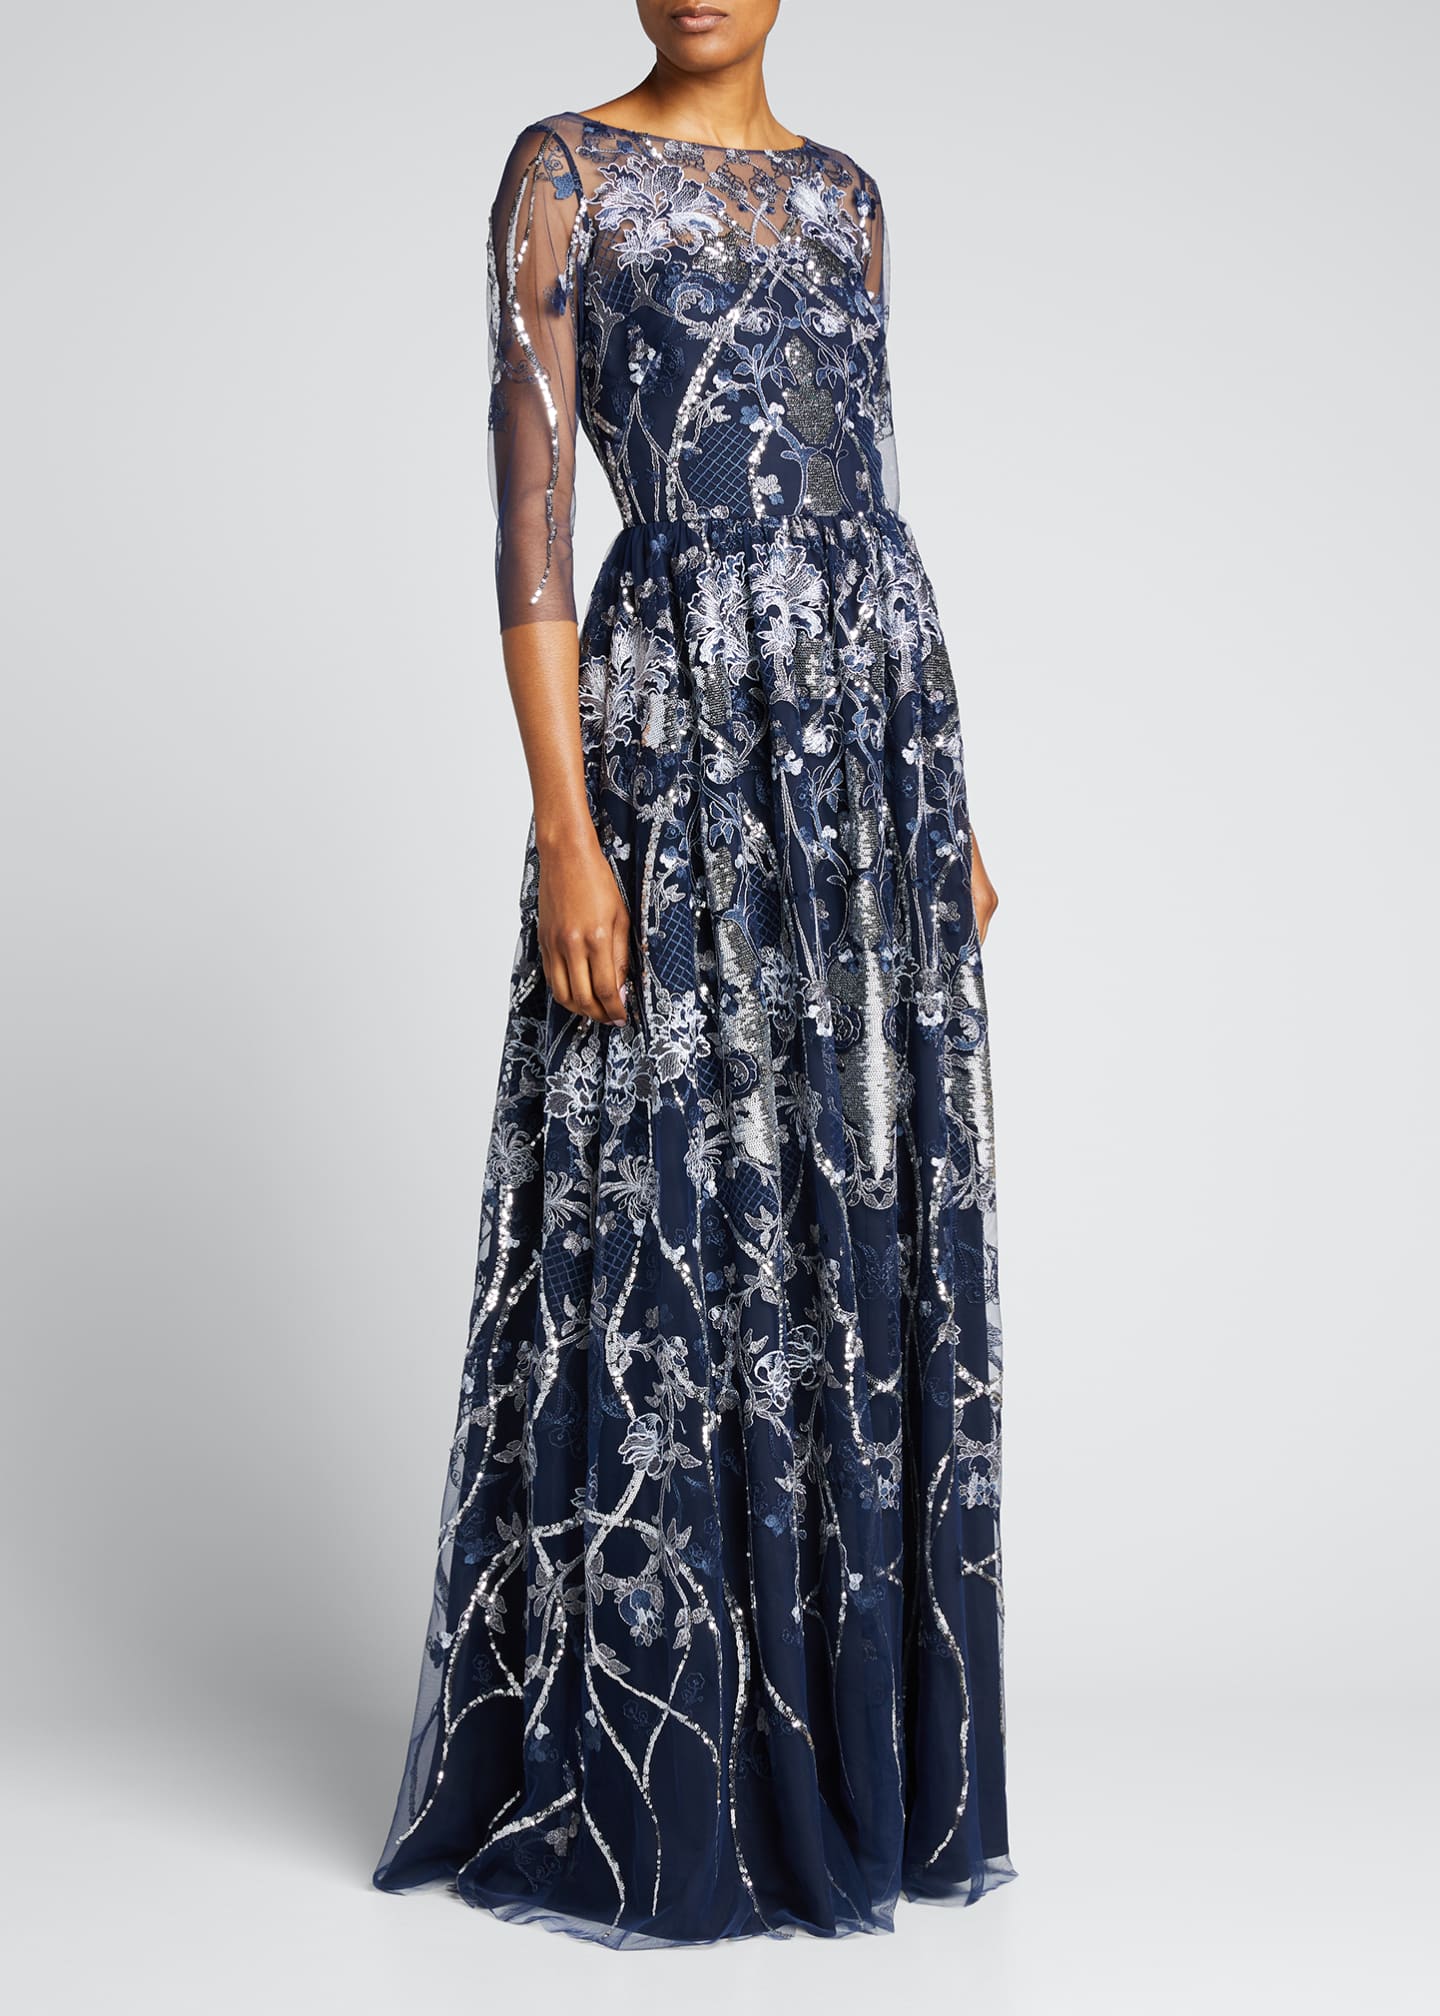 Marchesa Notte Sequin Embroidered Tulle A-Line Gown - Bergdorf Goodman